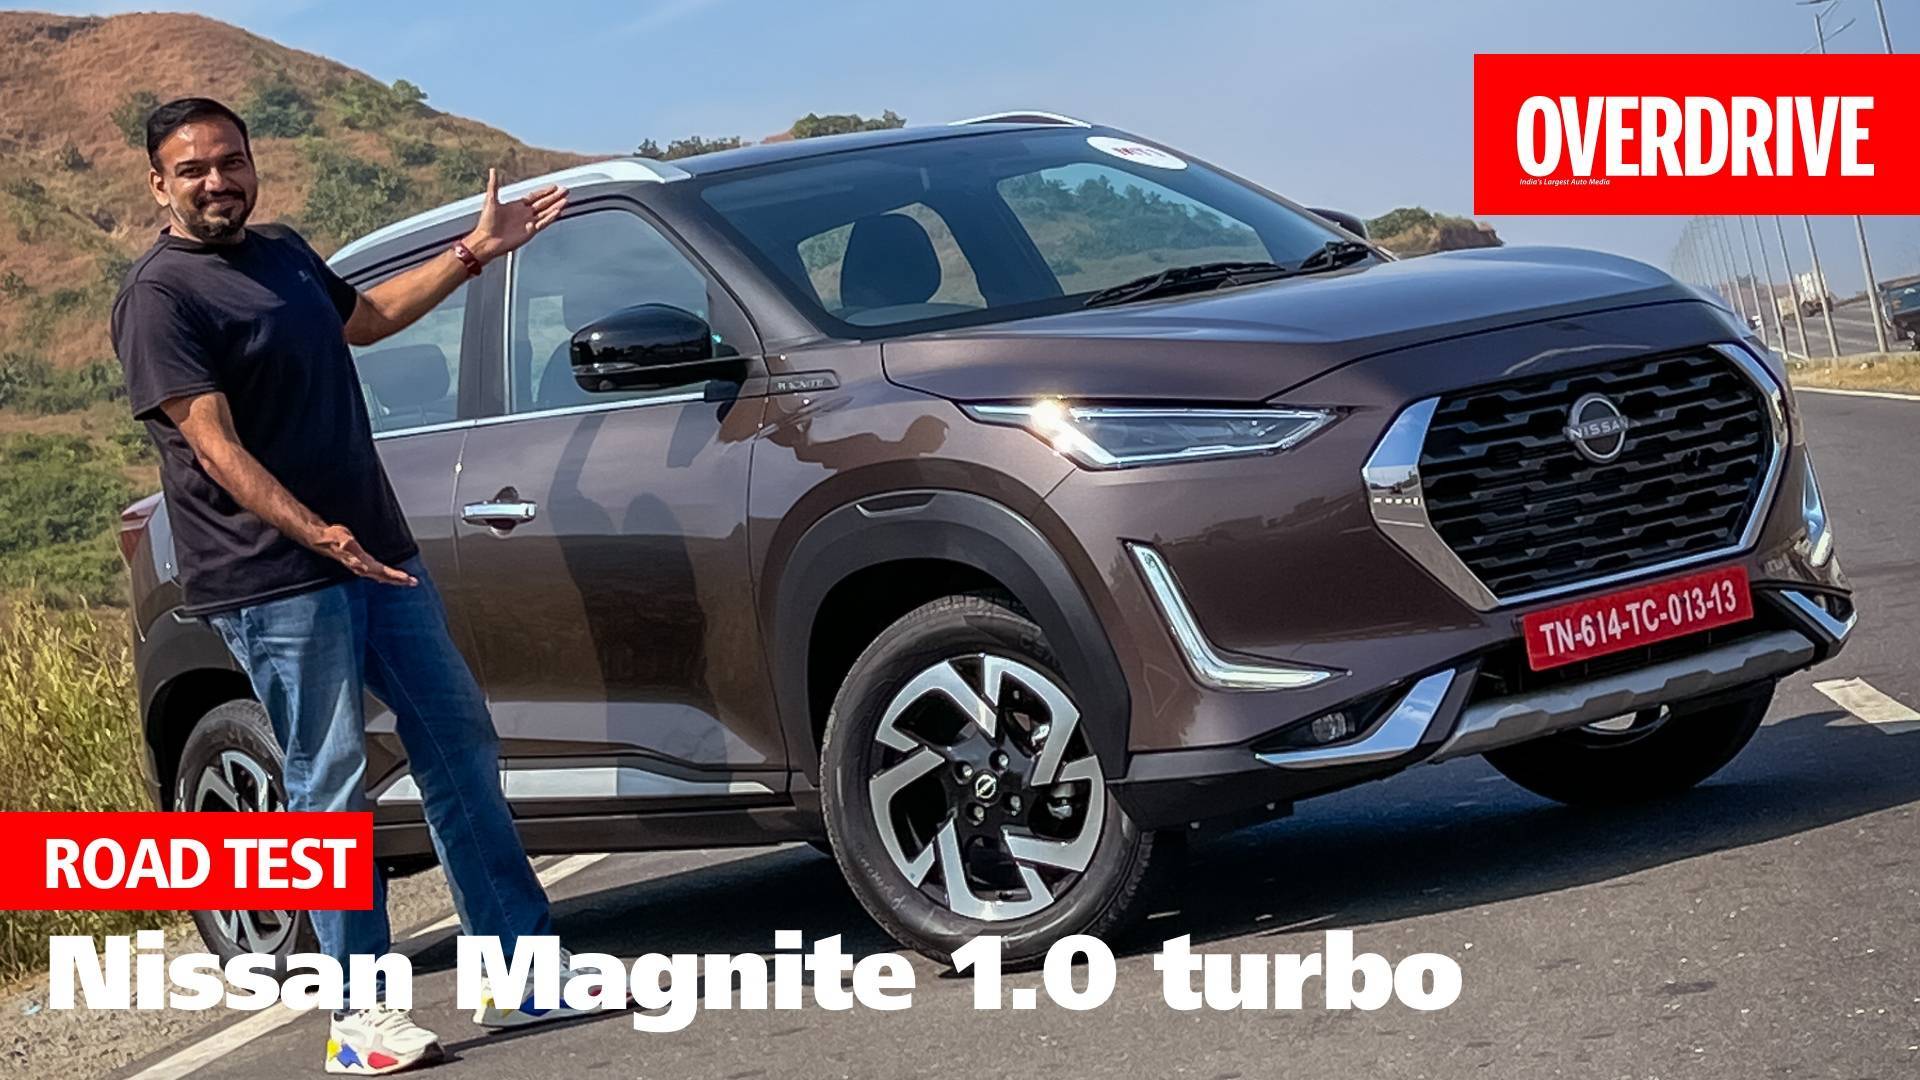 Nissan Magnite 1.0 turbo - road test review